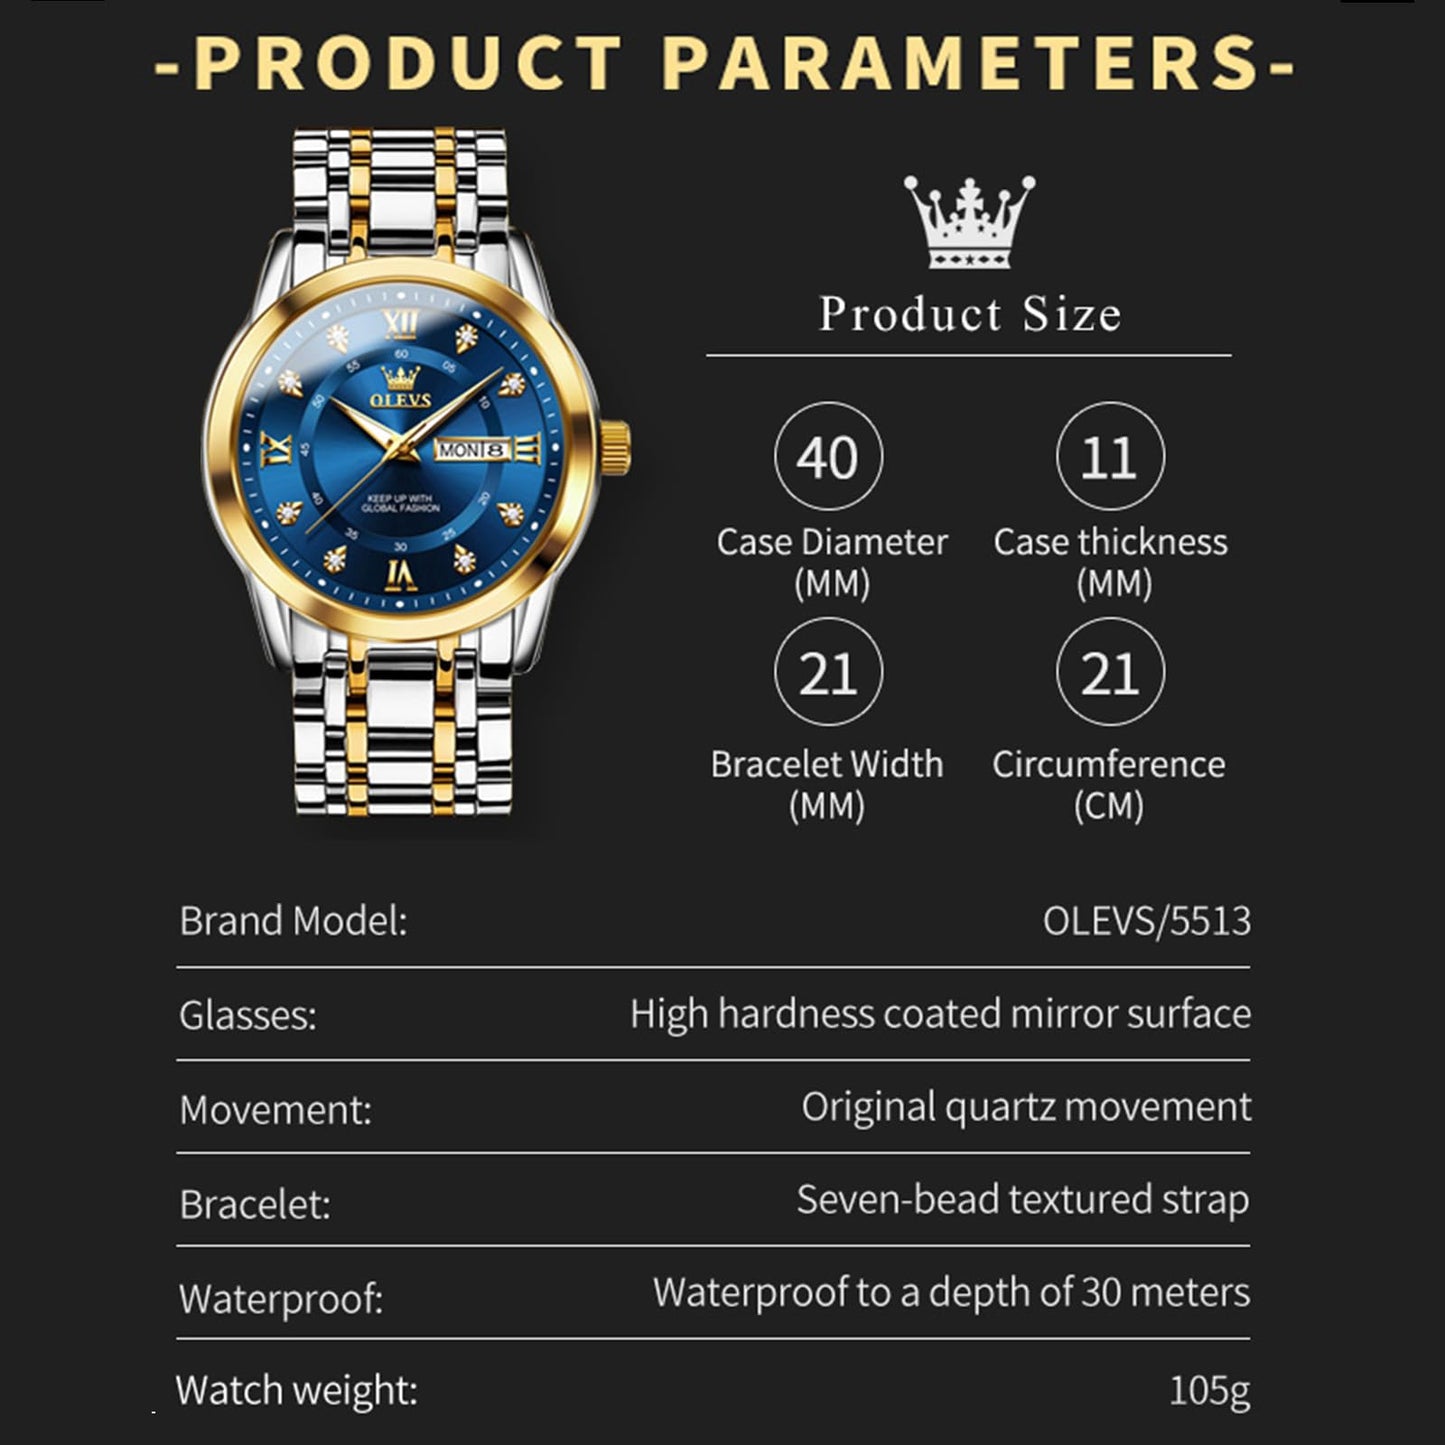 OLEVS Men's Watches Gold and Blue Mens Watches Luxury Dress Watches for Men Classic Two Tone Mens Wrist Watches Analog Quartz Watches Mens Waterproof Stainless Steel Watches Reloj para Hombre